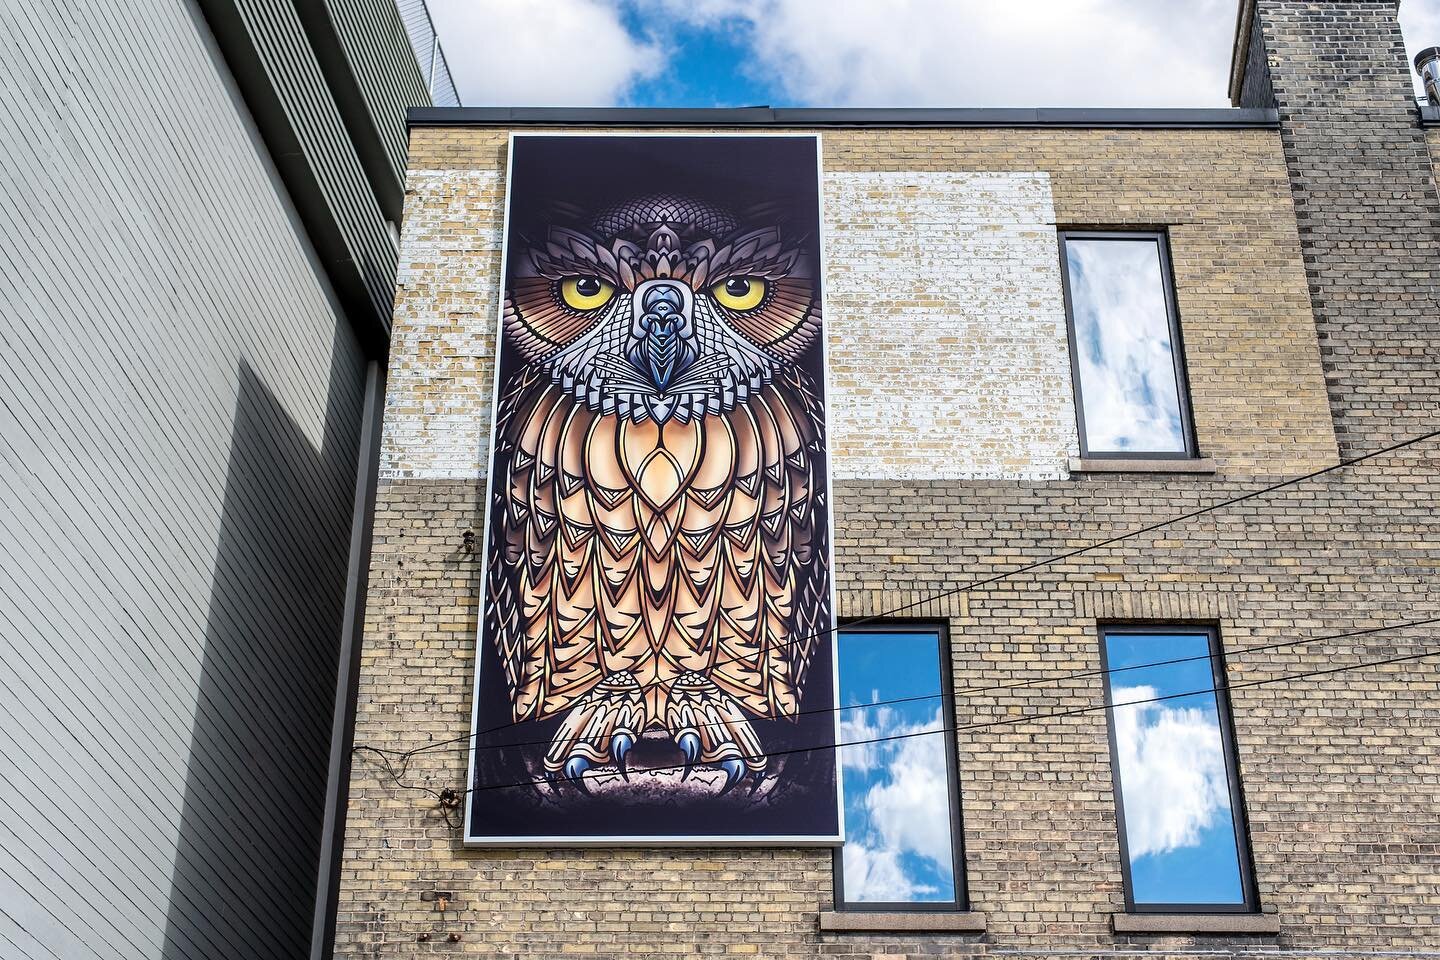 Our newest Great-Horned Owl mural is up in the @dtkitchener! 🦉 Thank you to the Downtown Kitchener BIA, @kwartgallery and @cityofkitchener for their creative vision for ART PROJECT 2020, bringing public art to all ☀️ There are many new artworks comi